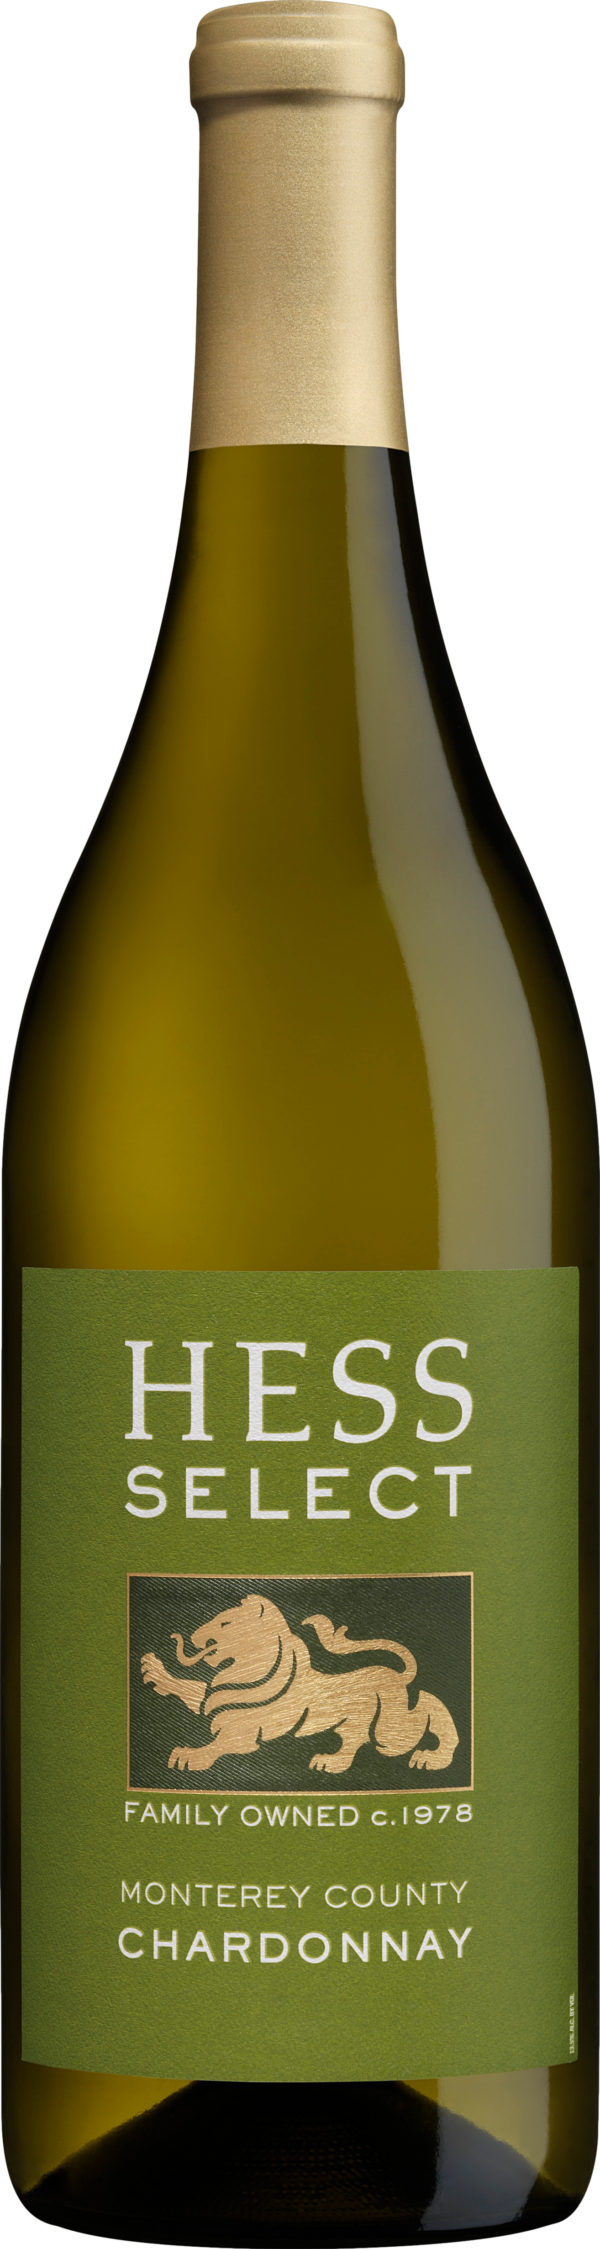 Product image of Hess Collection Select Chardonnay 2020 from 8wines